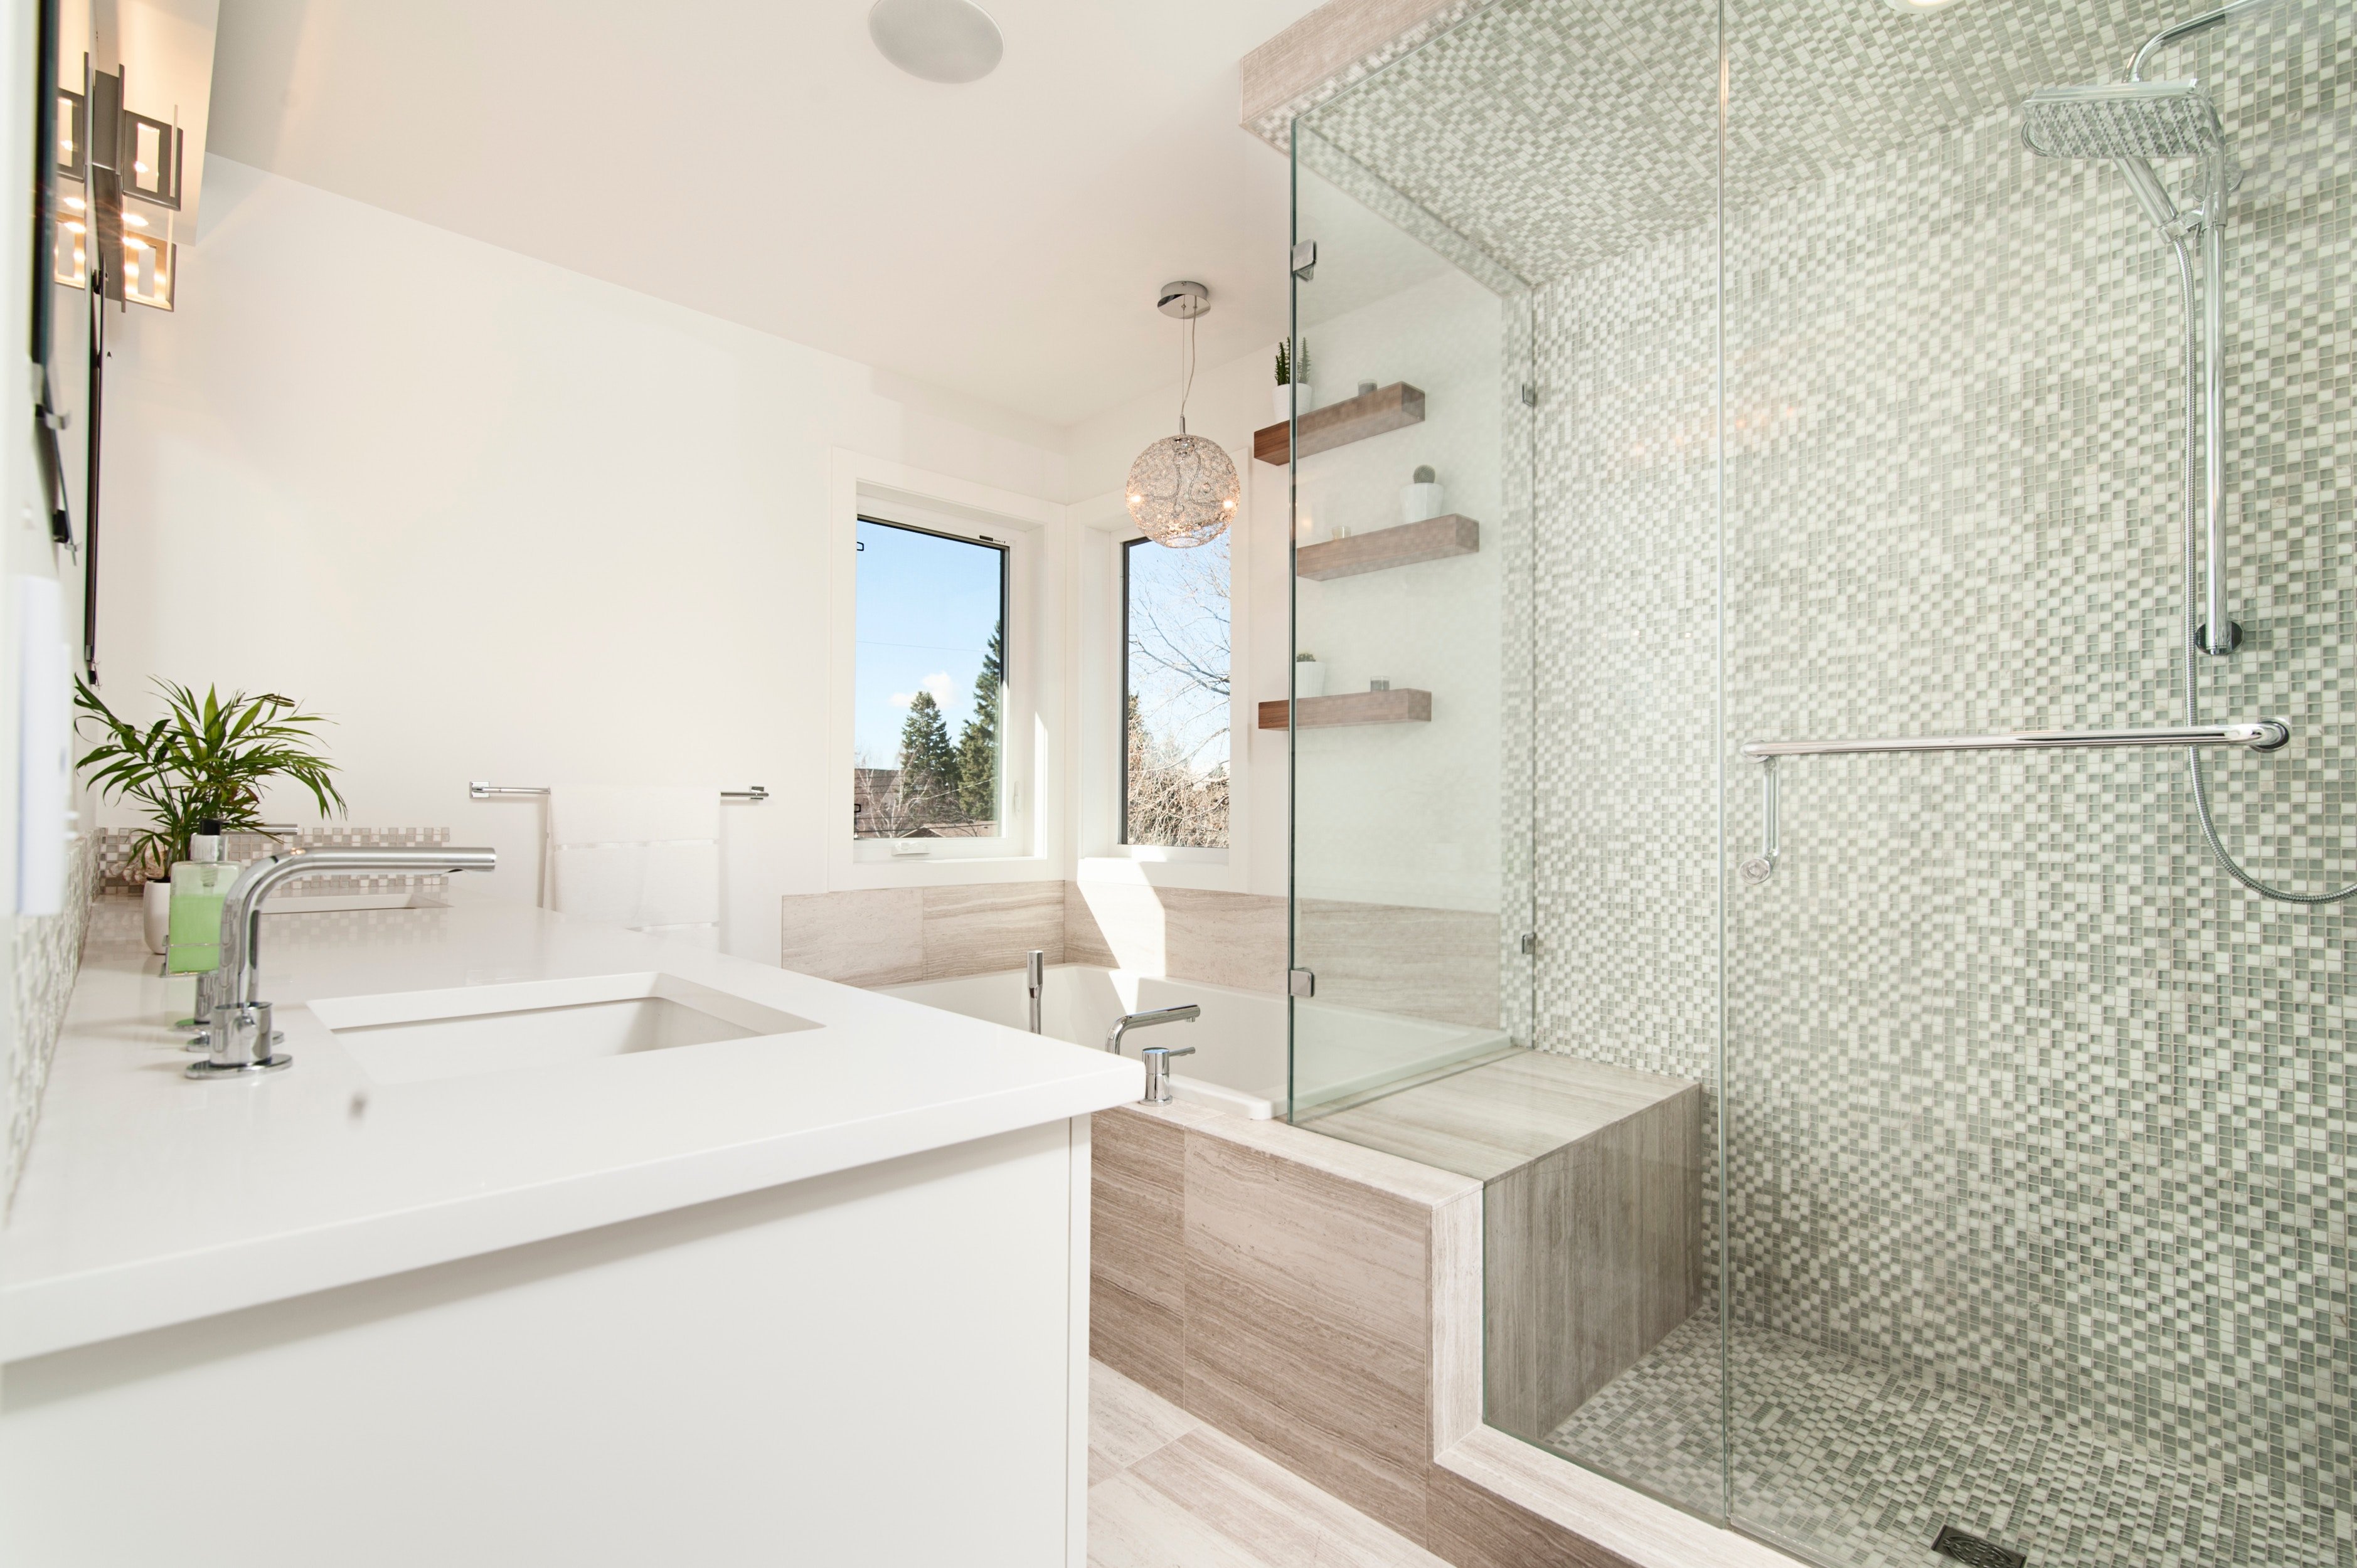 Photographing Bathrooms How to Overcome Bright Windows